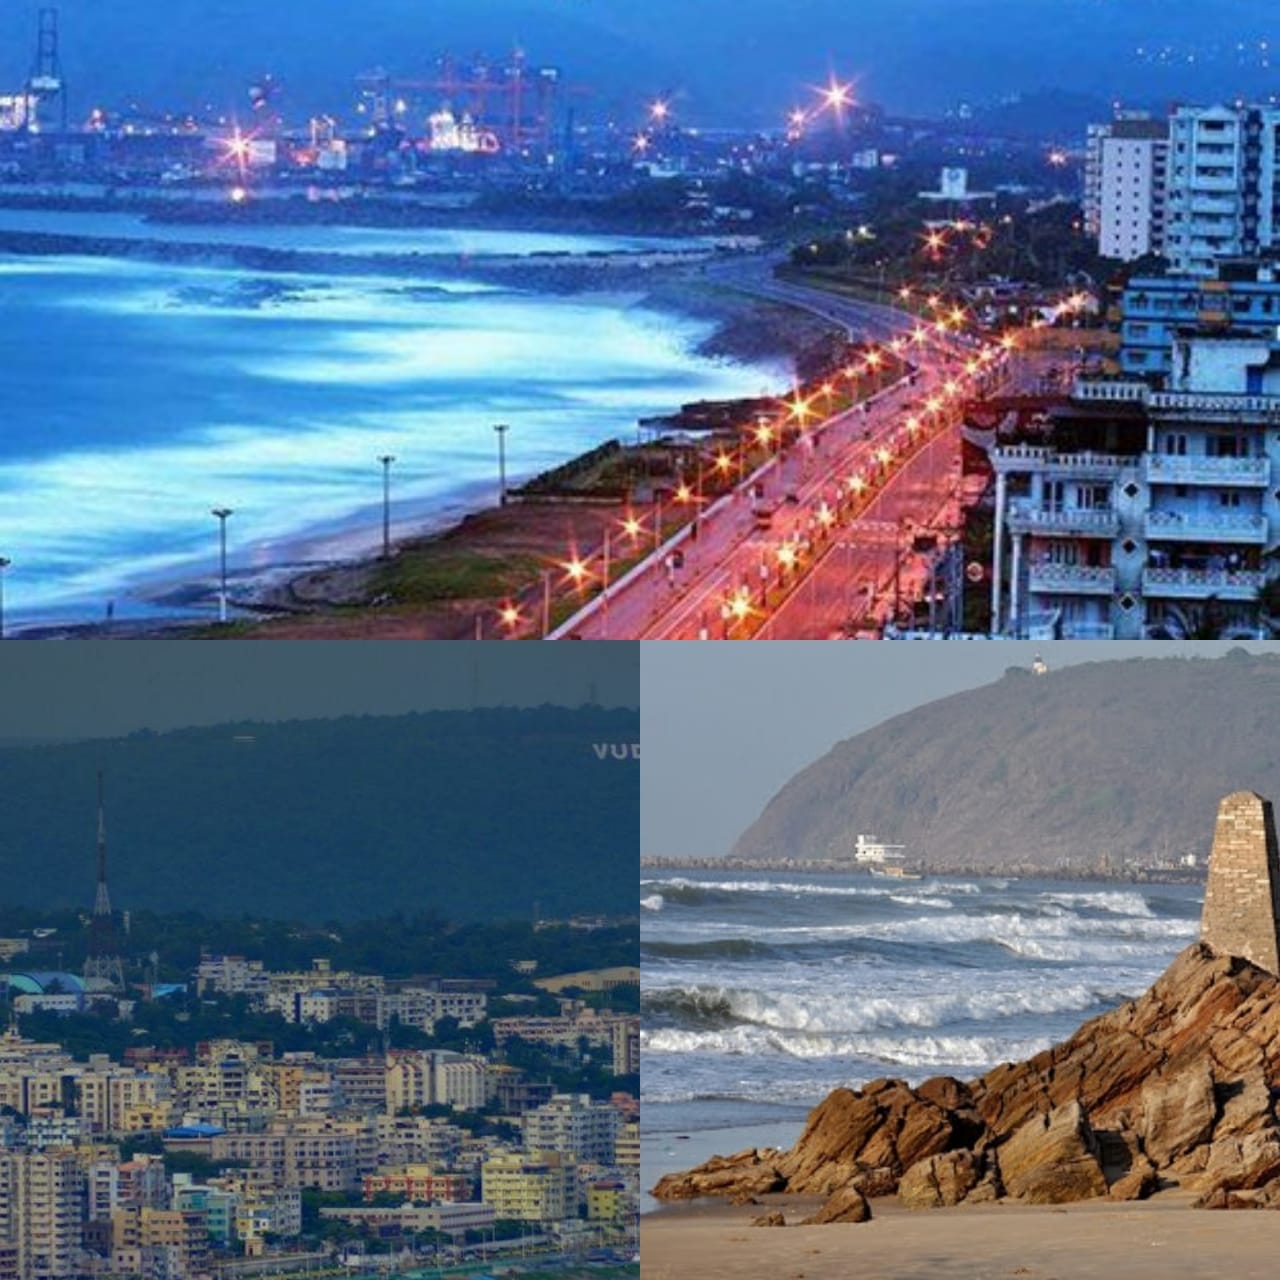 About Vizag